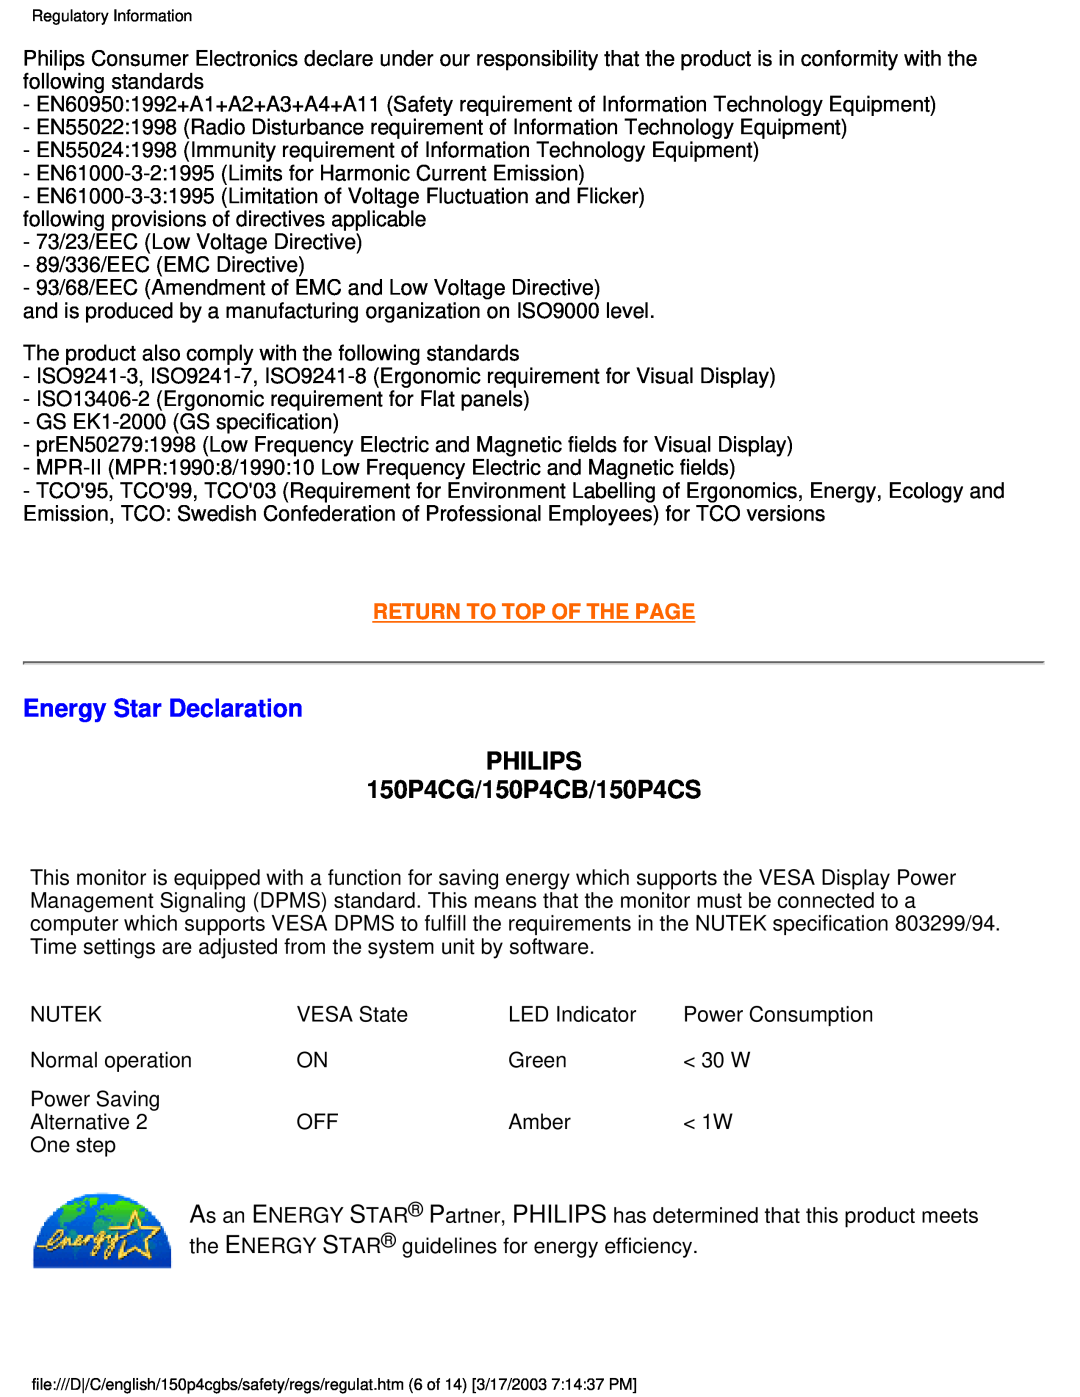 Philips user manual Energy Star Declaration, PHILIPS 150P4CG/150P4CB/150P4CS, Return To Top Of The Page 